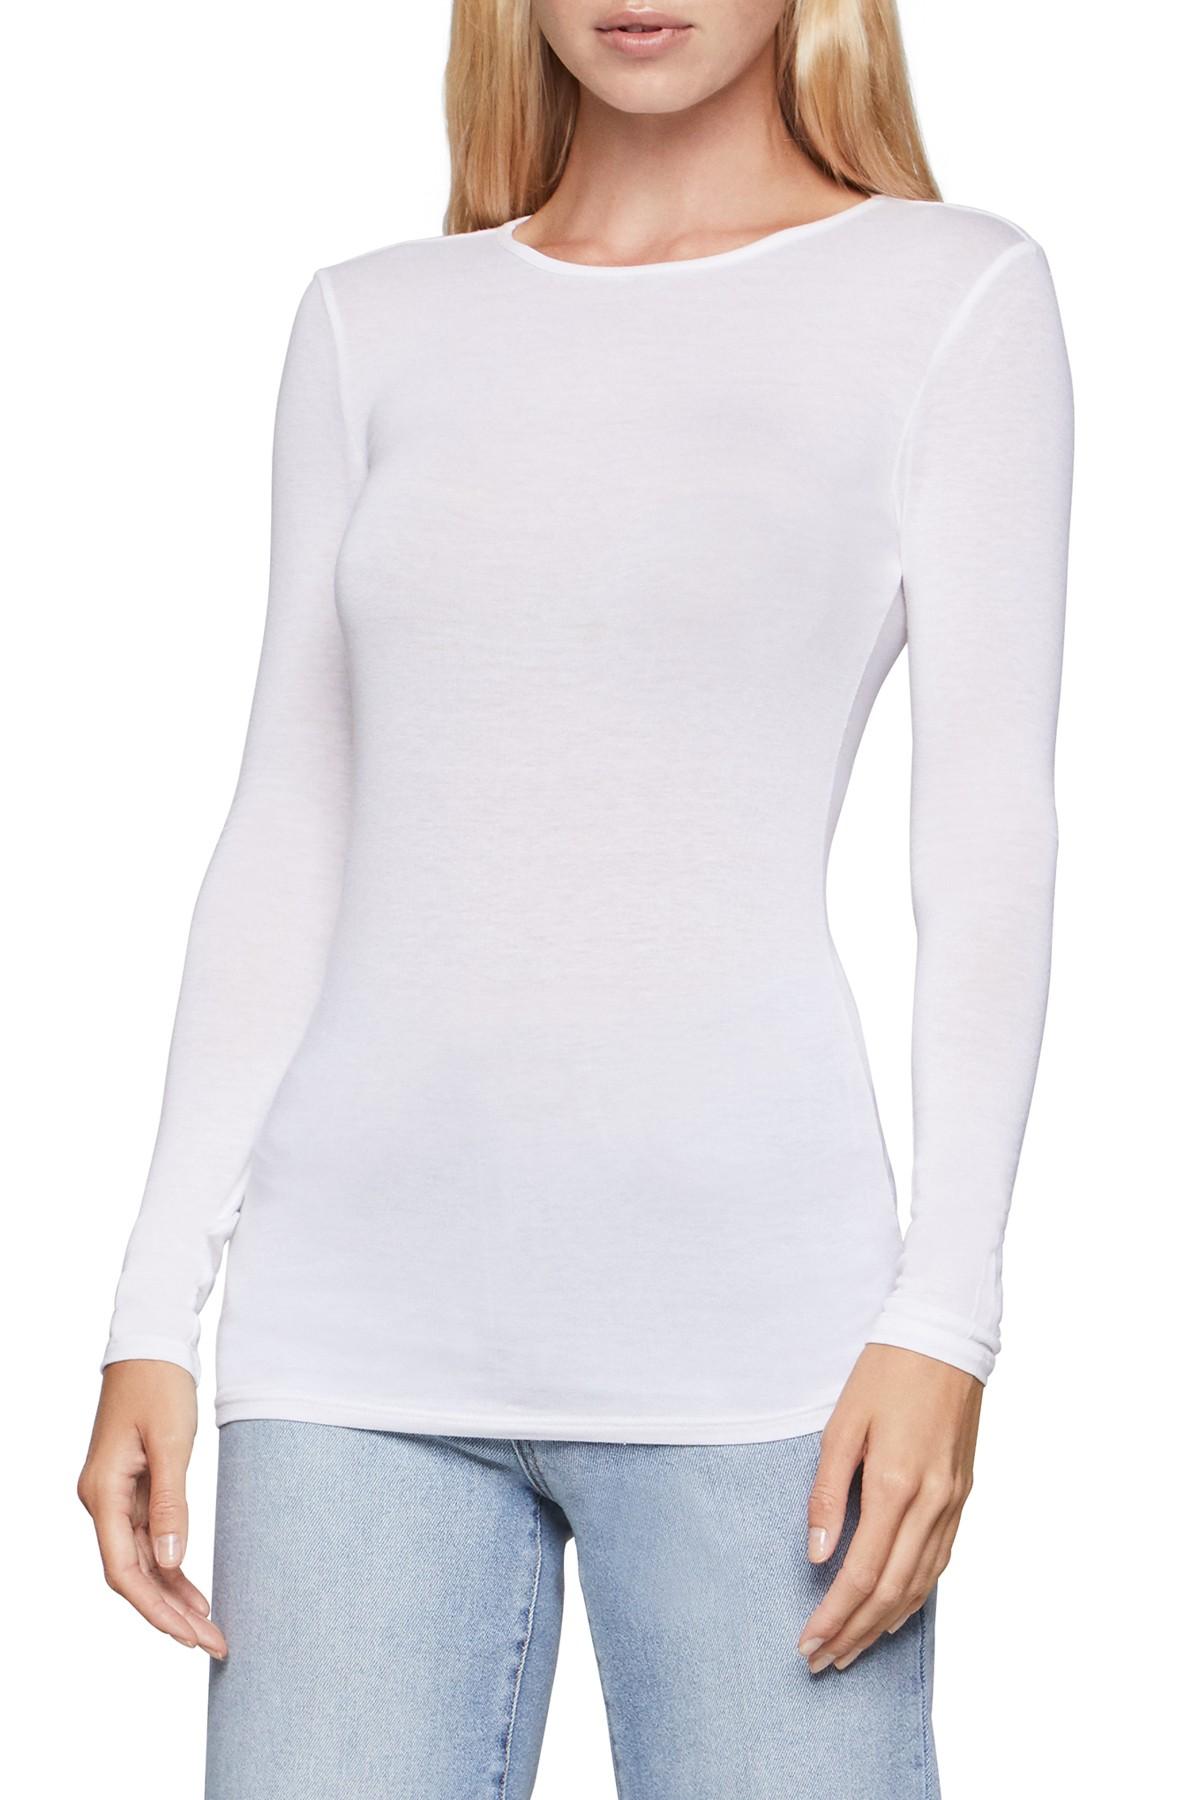 BCBGeneration Synthetic Long-sleeve Layering Top in White - Lyst